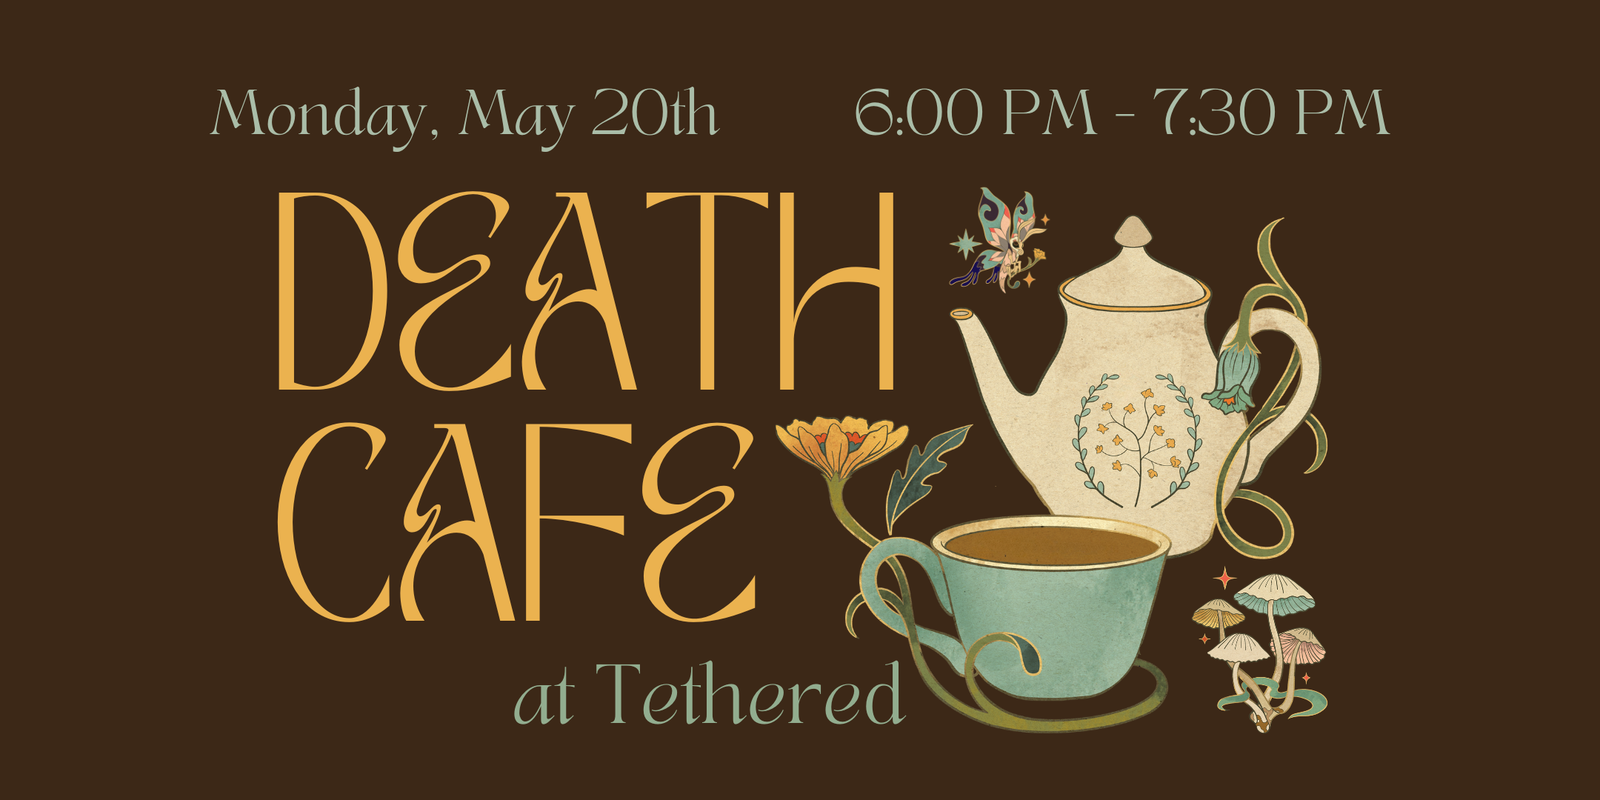 Goffstown NH Death Cafe at Tethered